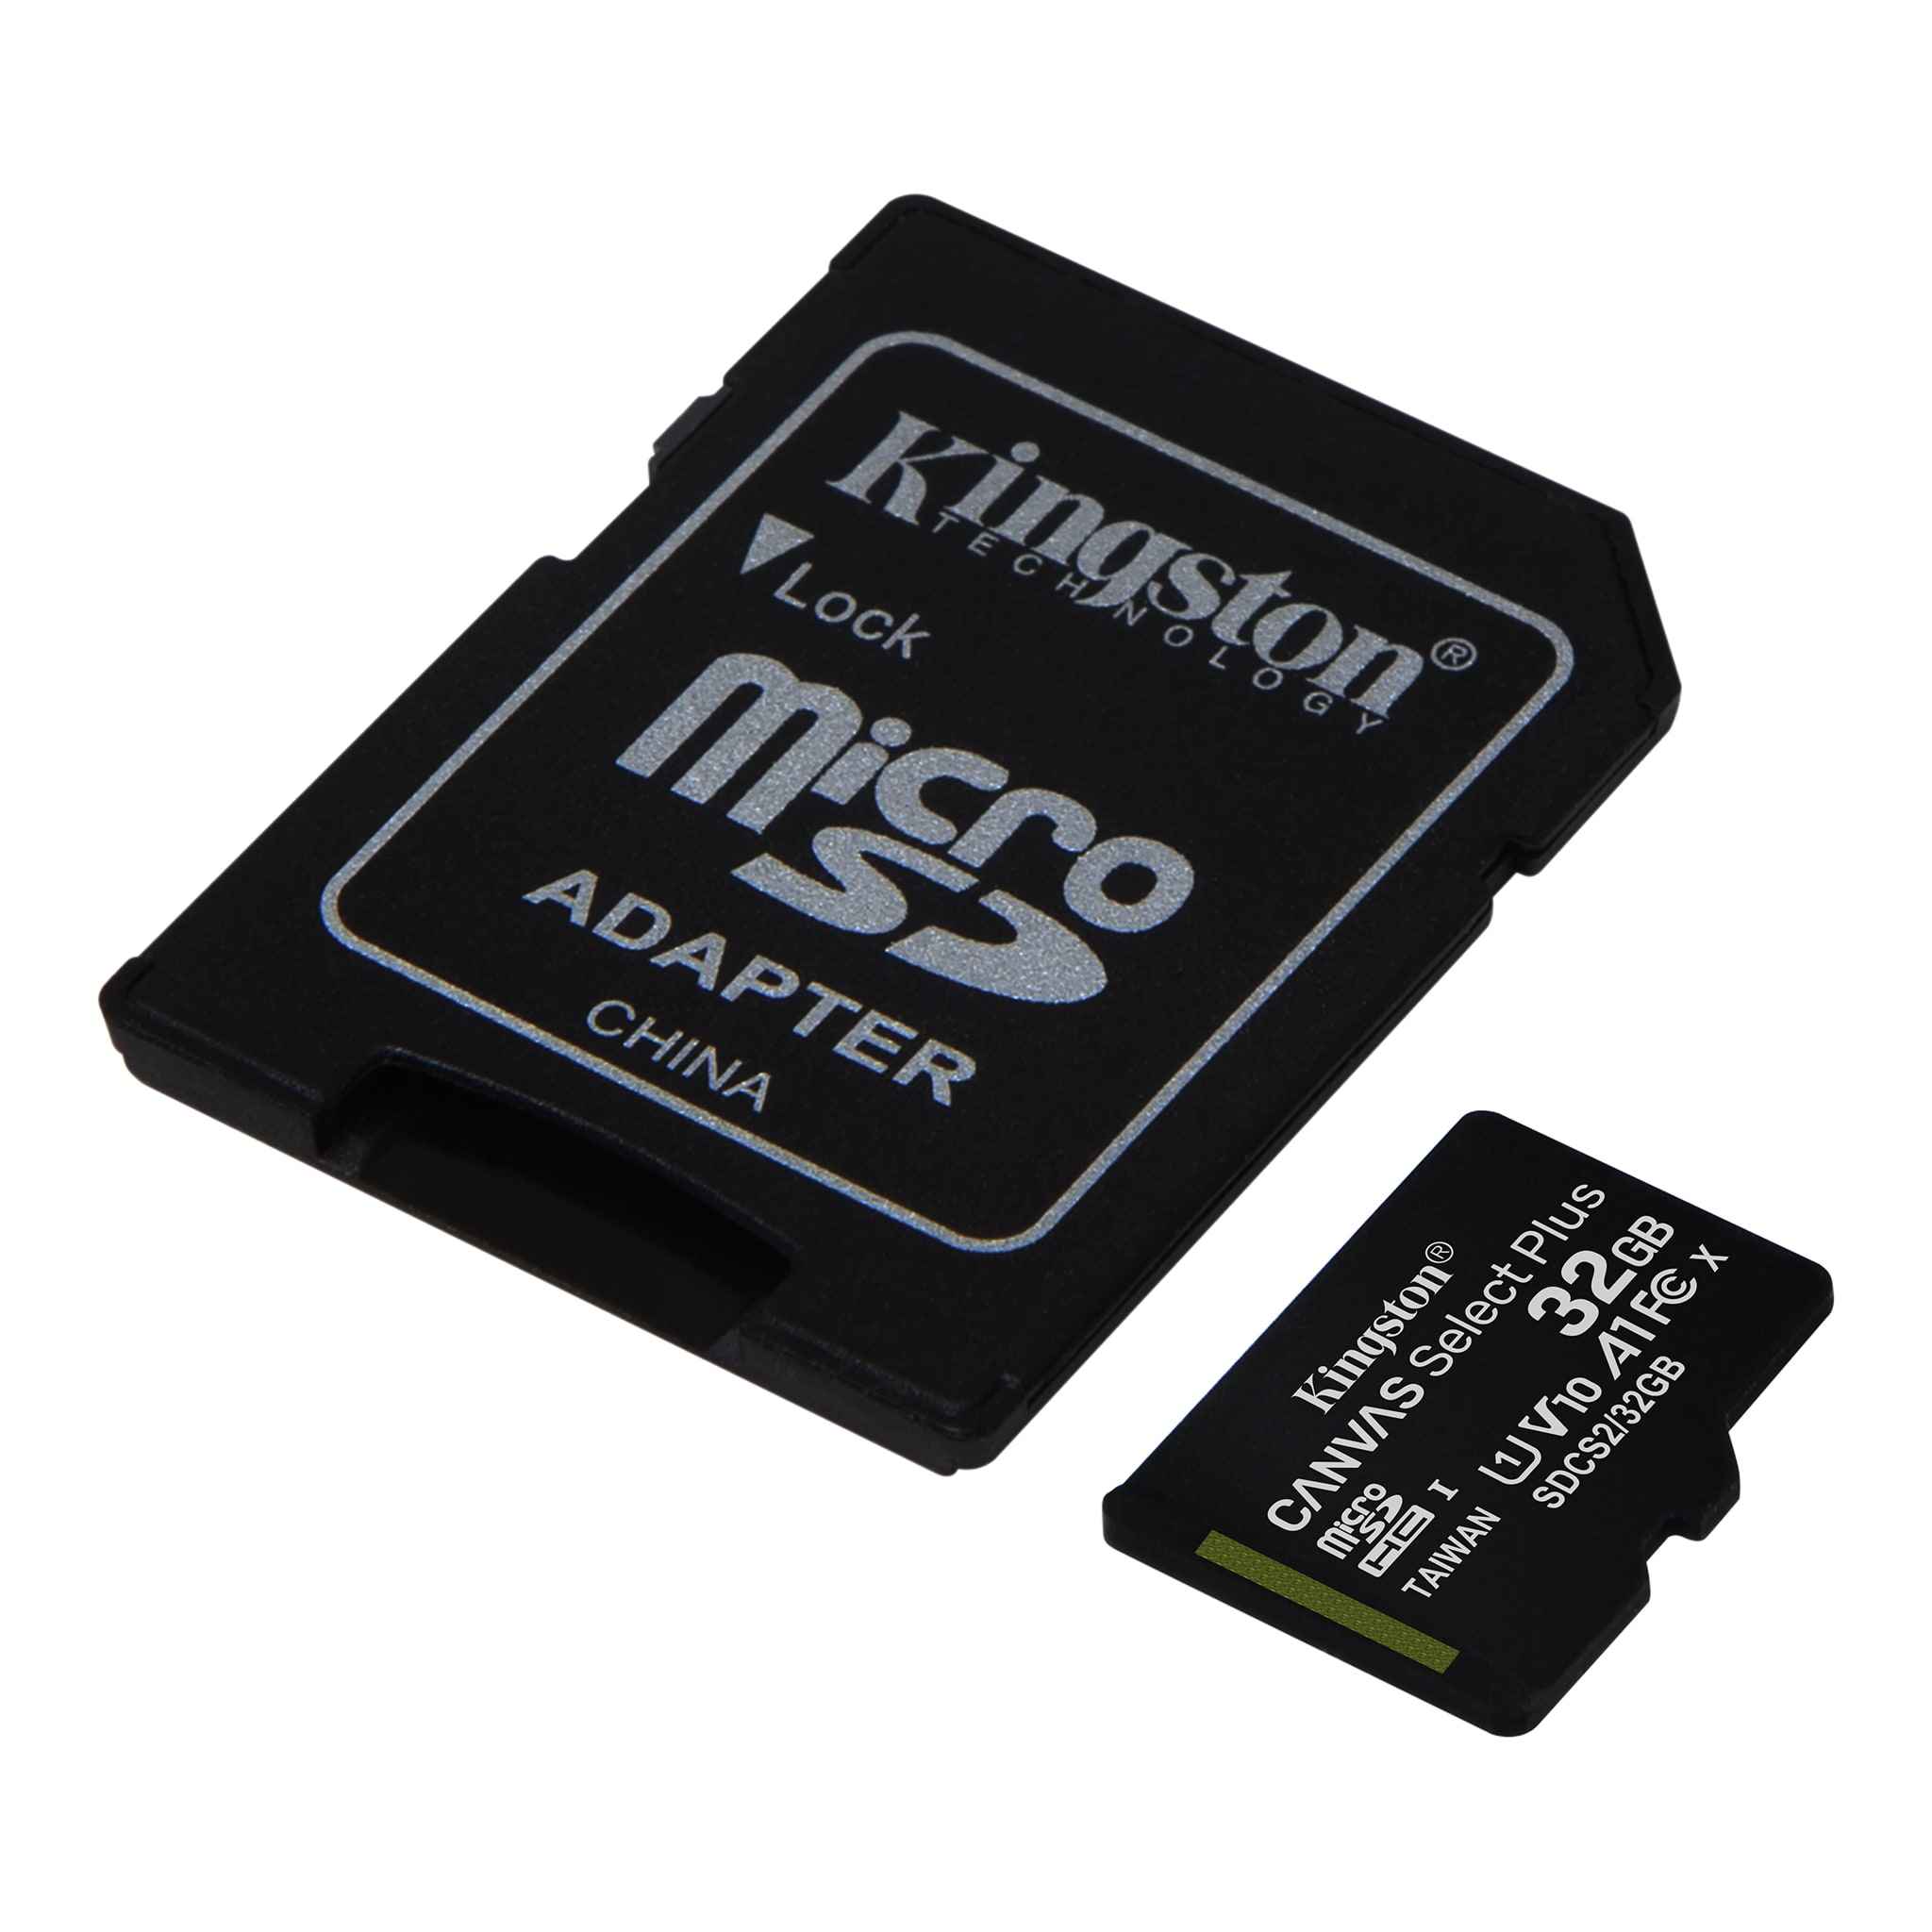 Kingston 512GB Samsung SM-N910R MicroSDXC Canvas Select Plus Card Verified by SanFlash. 100MBs Works with Kingston